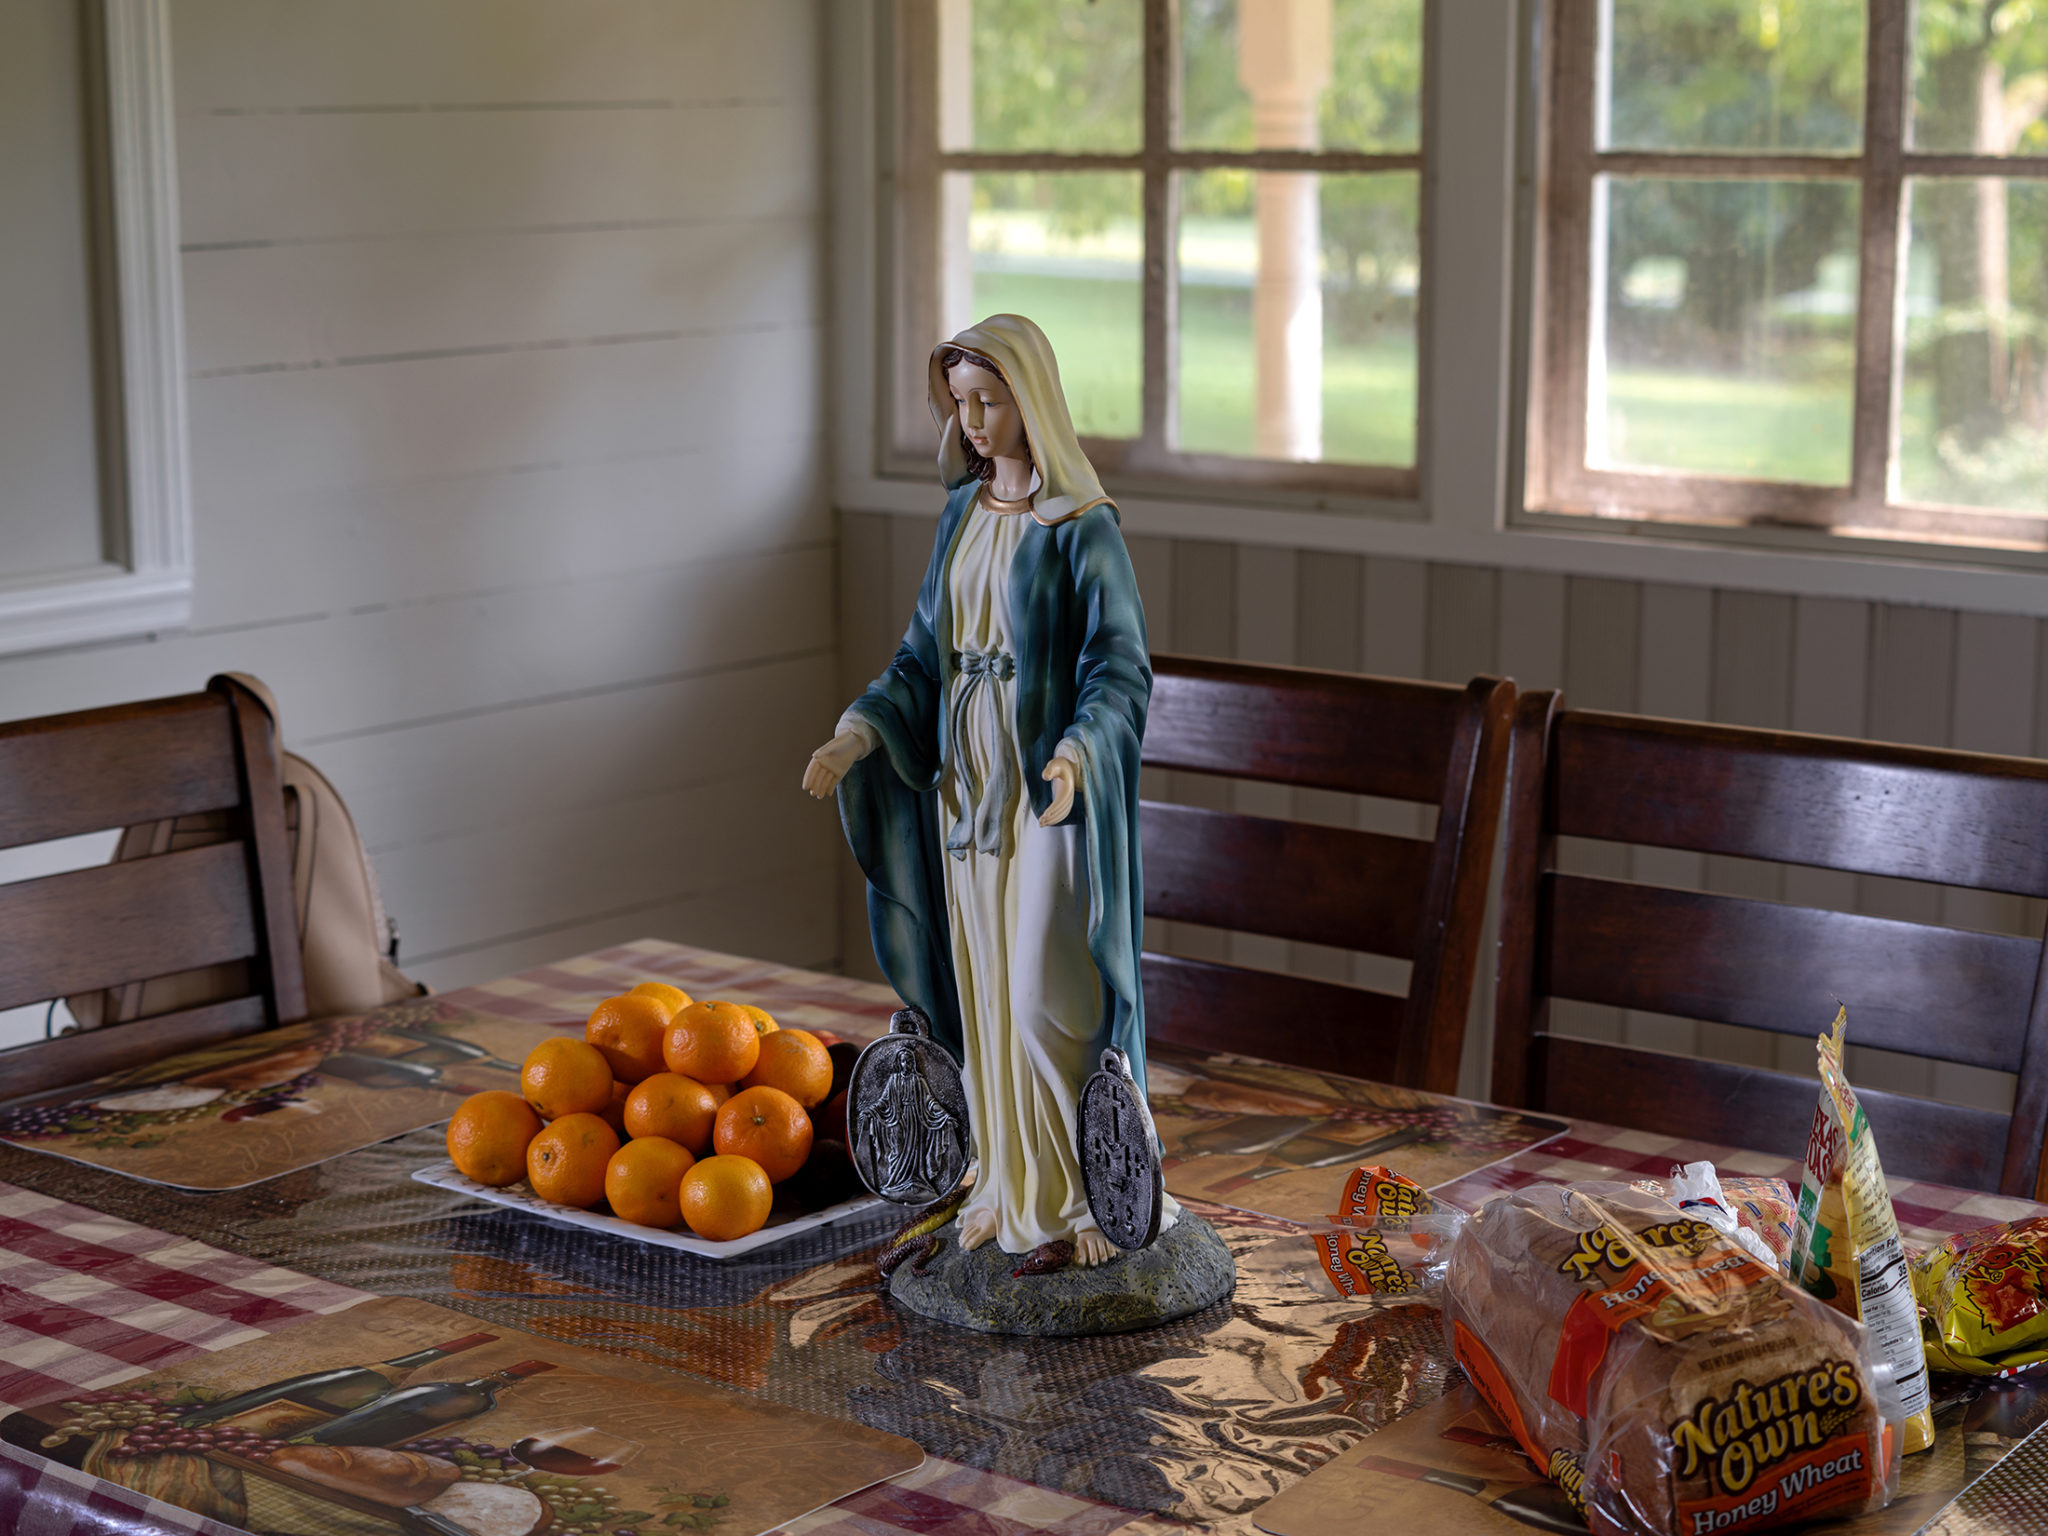 A statue of Our Lady of Grace placed at the dining room table where Brenda and her family live in Tucker. The statue was brought to the home by the Legion of Mary as part of their Pilgrim Virgin Statue Home Visitation Program. Photographer: Johnathon Kelso